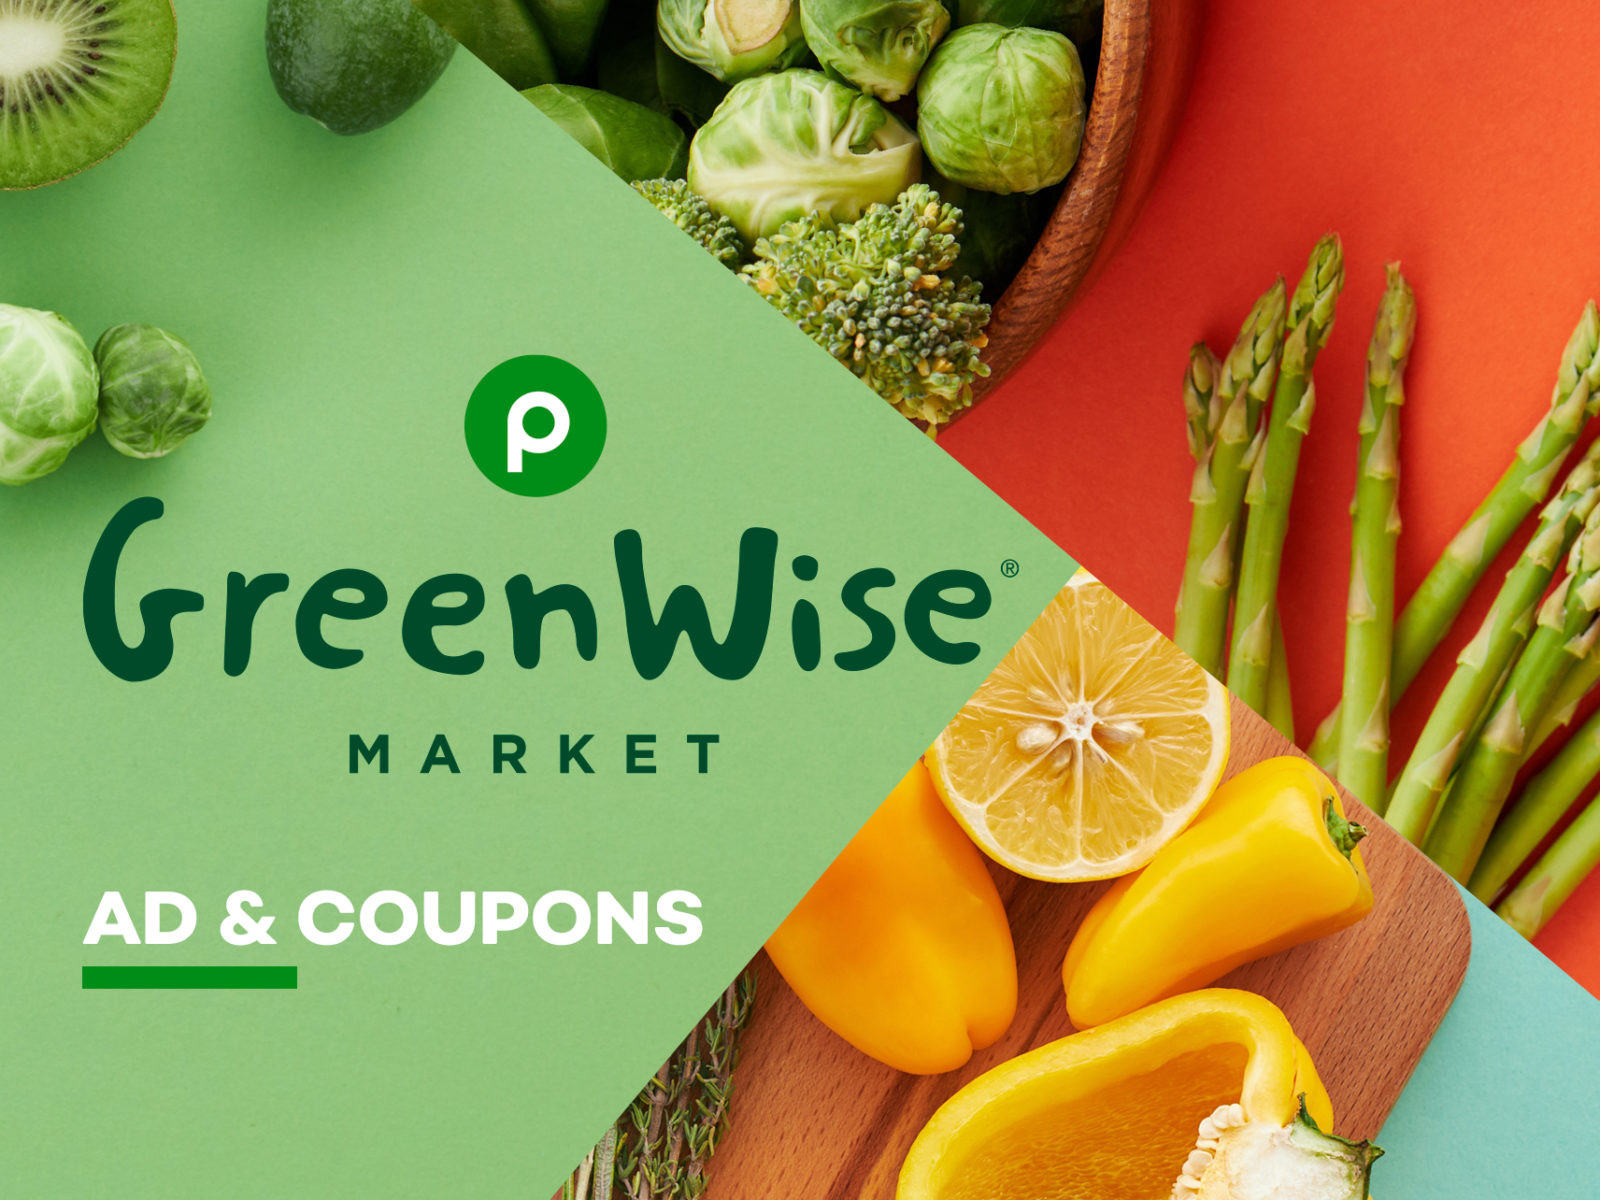 Publix GreenWise Market Ad & Coupons Week Of 6/30 to 7/6 (6/29 to 7/5 For Some)